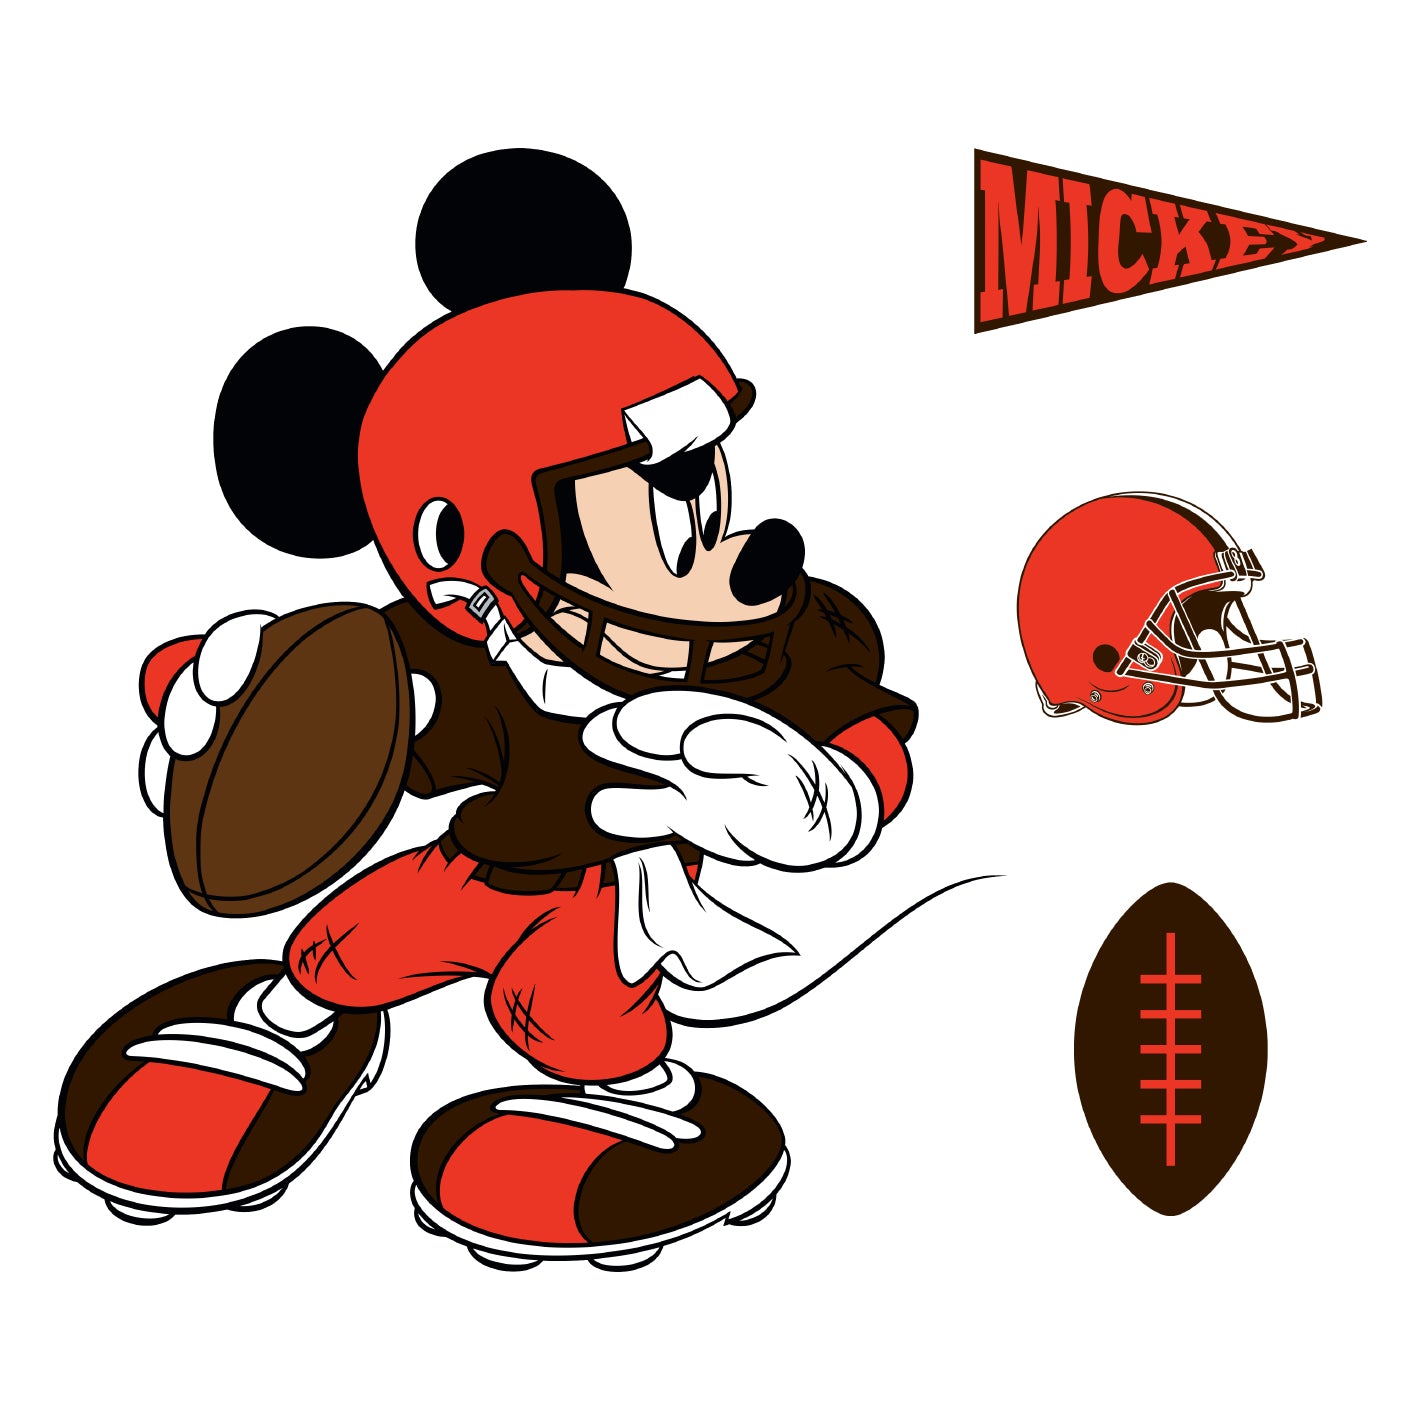 Disney Stickers - Disney Mickey Mouse Sports Lot of 3 Stickers.